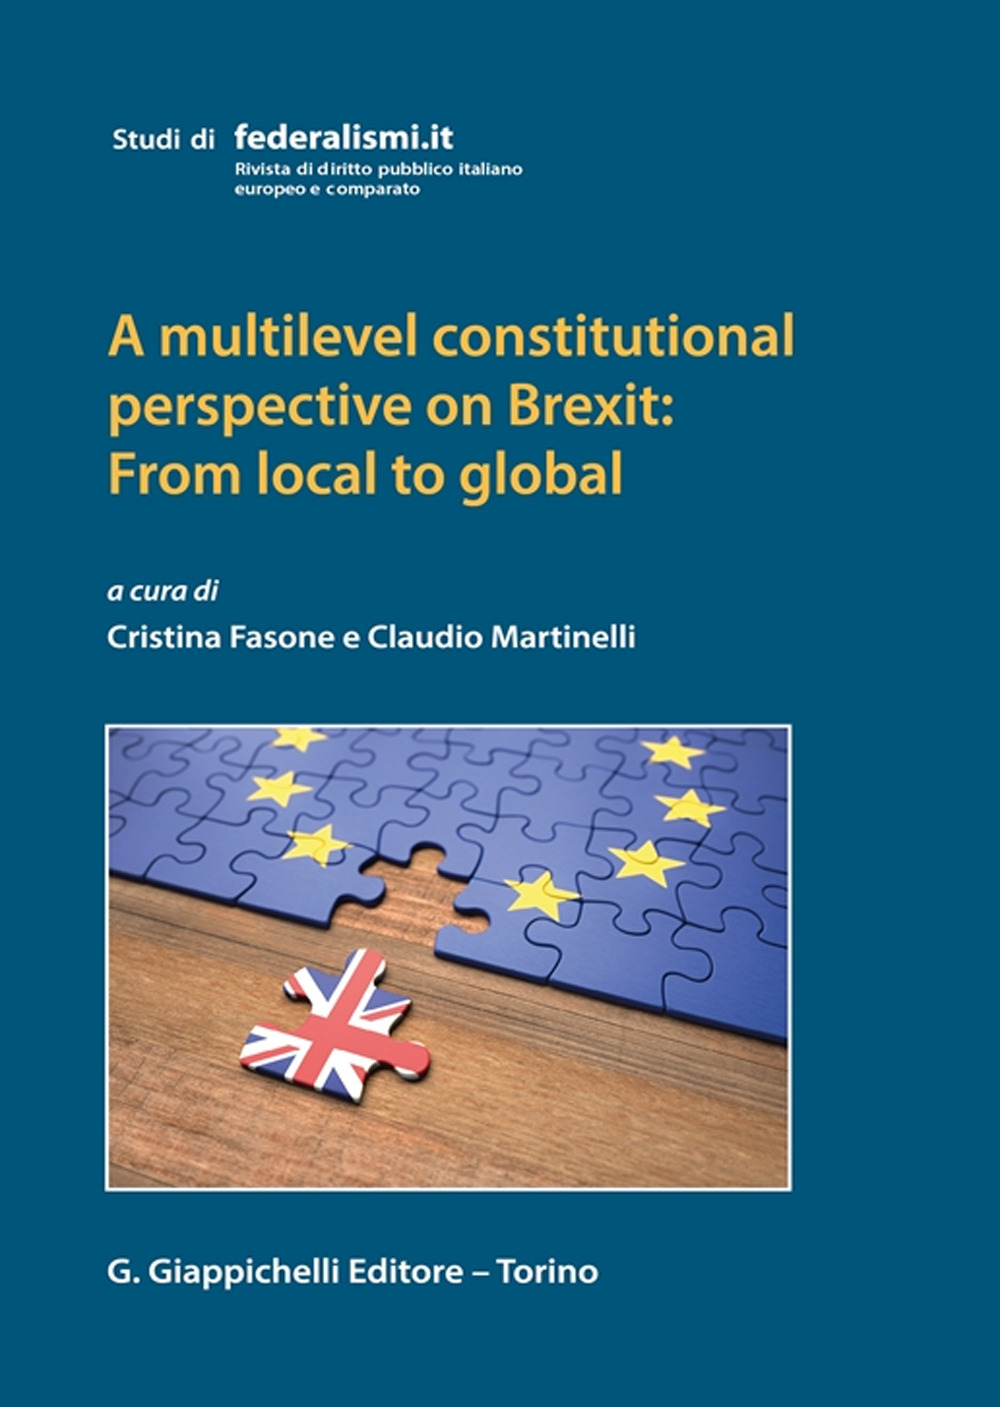 A multilevel constitutional perspective on Brexit: from local to global